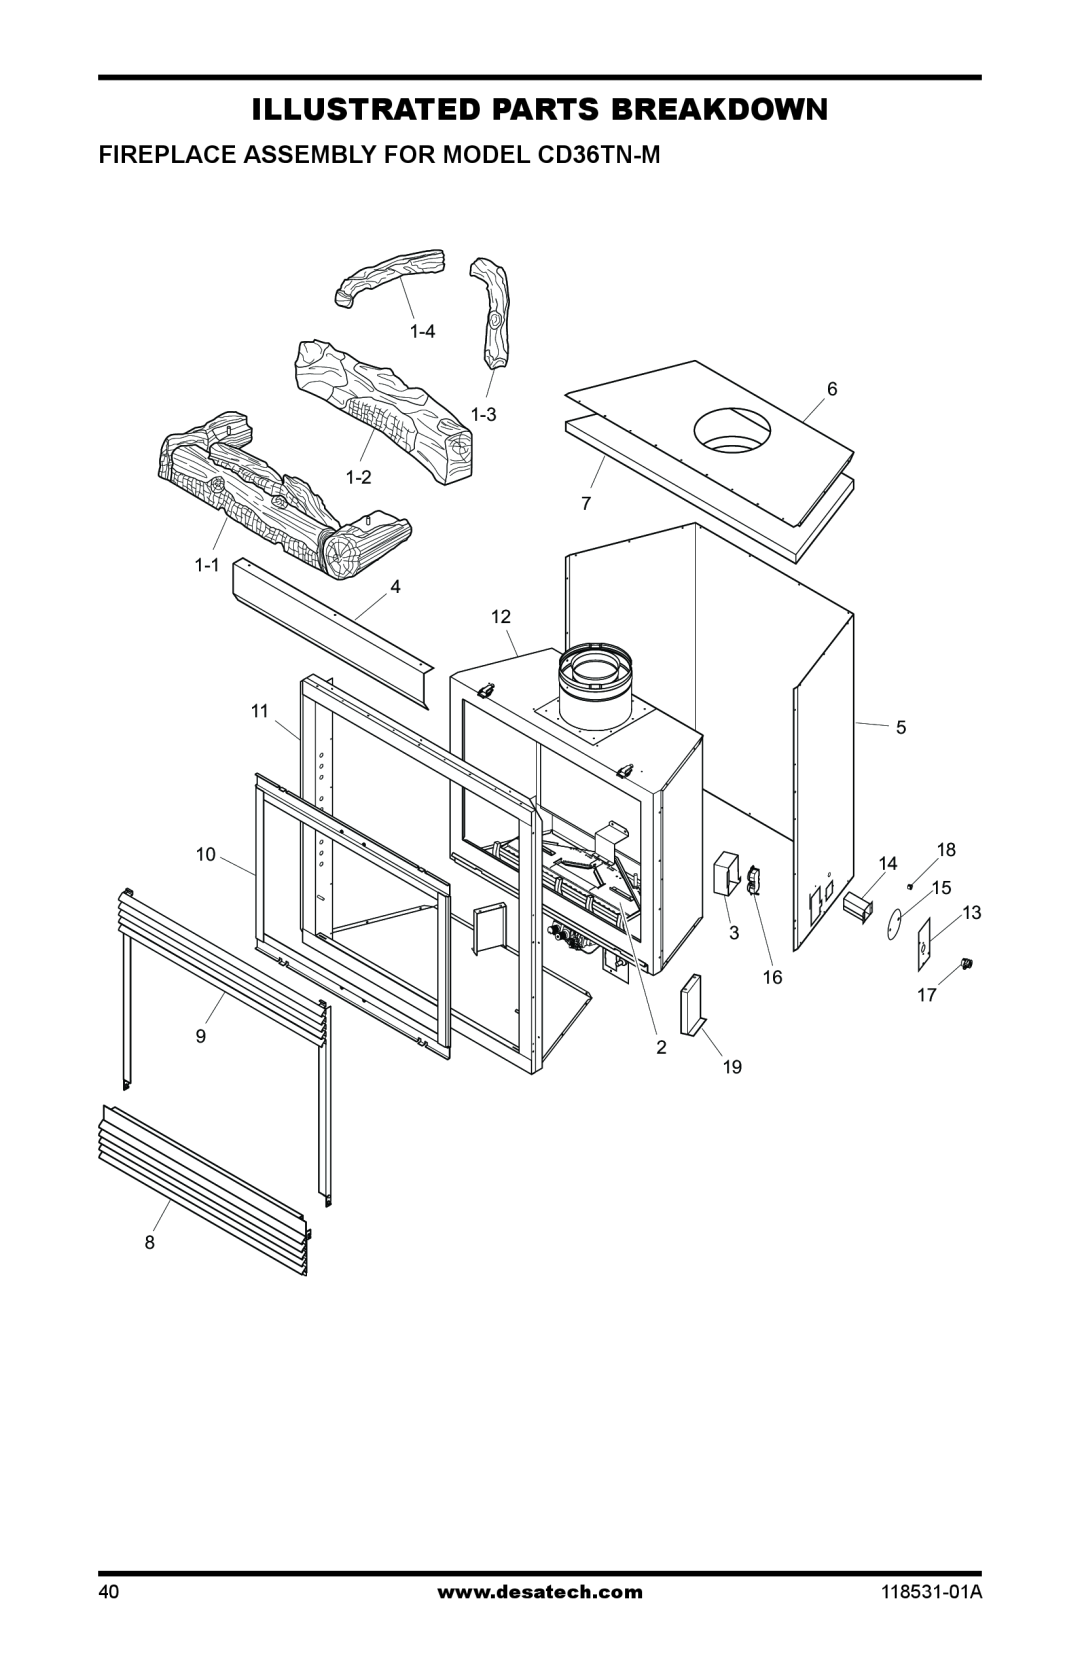 Desa installation manual Illustrated Parts Breakdown, Fireplace Assembly for Model CD36TN-M 